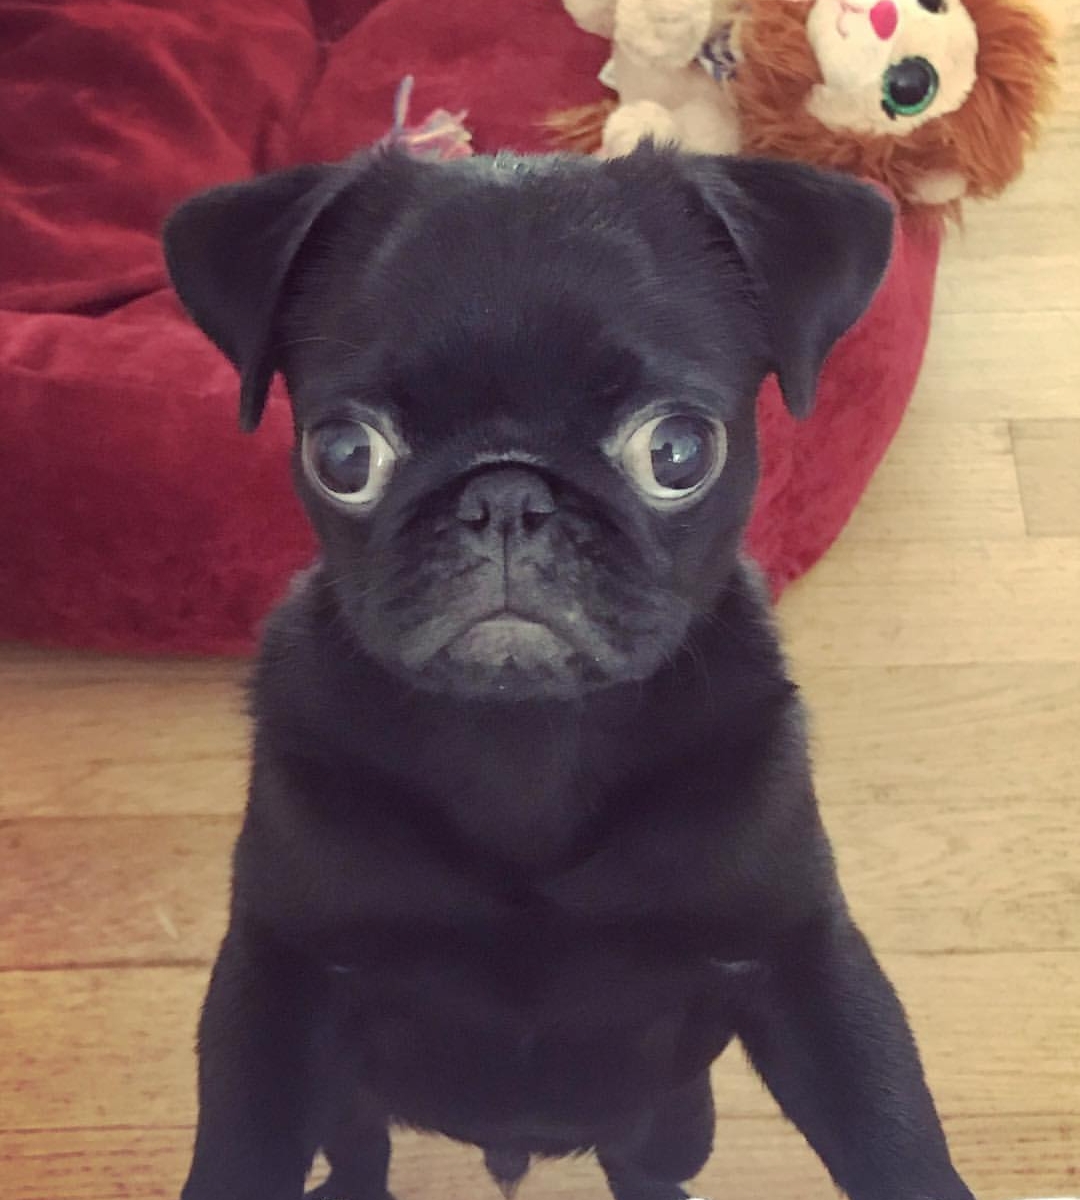 A black Pug standing up and leaning on the couch with its big begging eyes